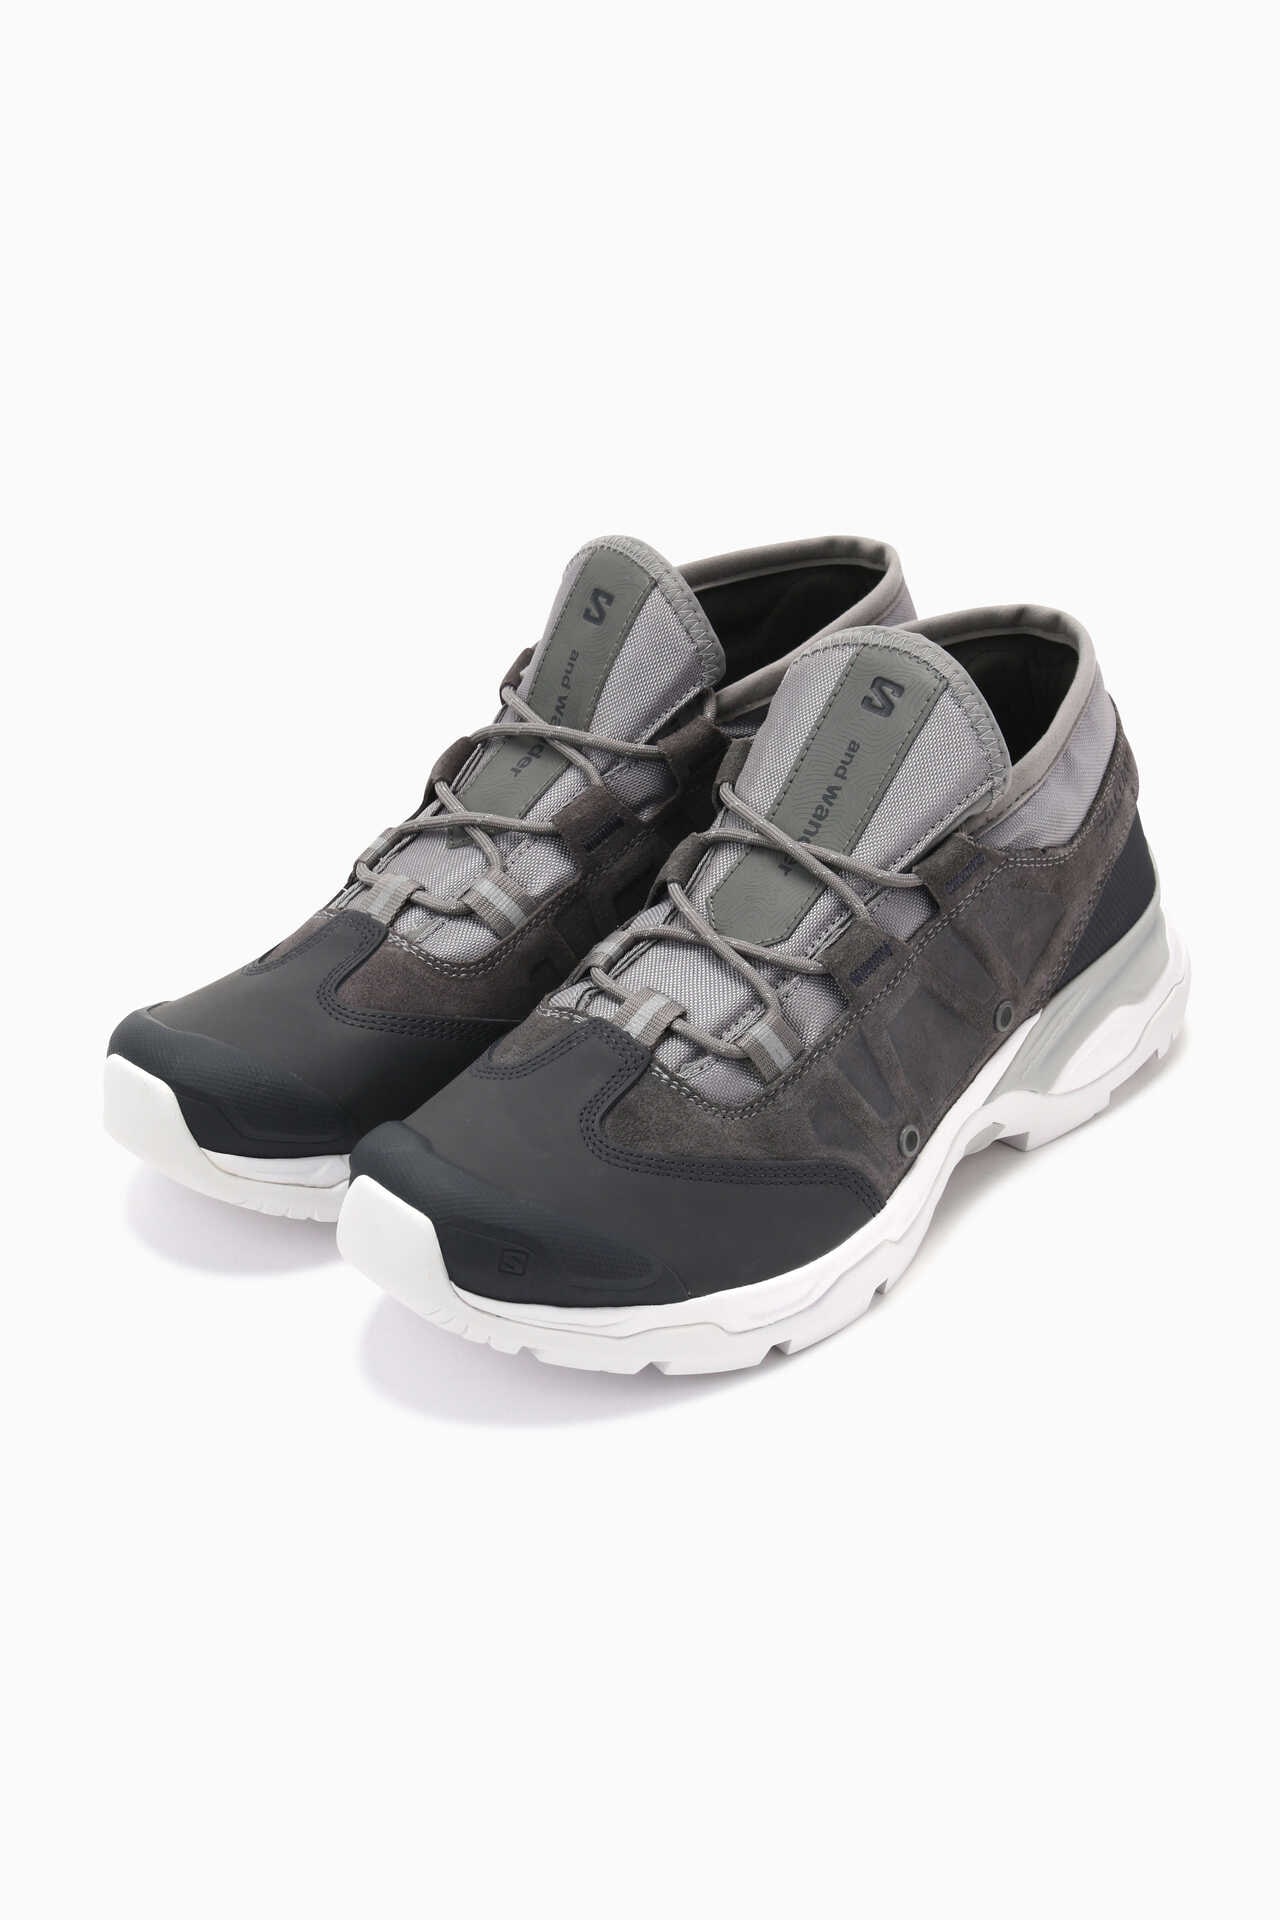 SALOMON Jungle Ultra low for and wander | footwear | and wander ...